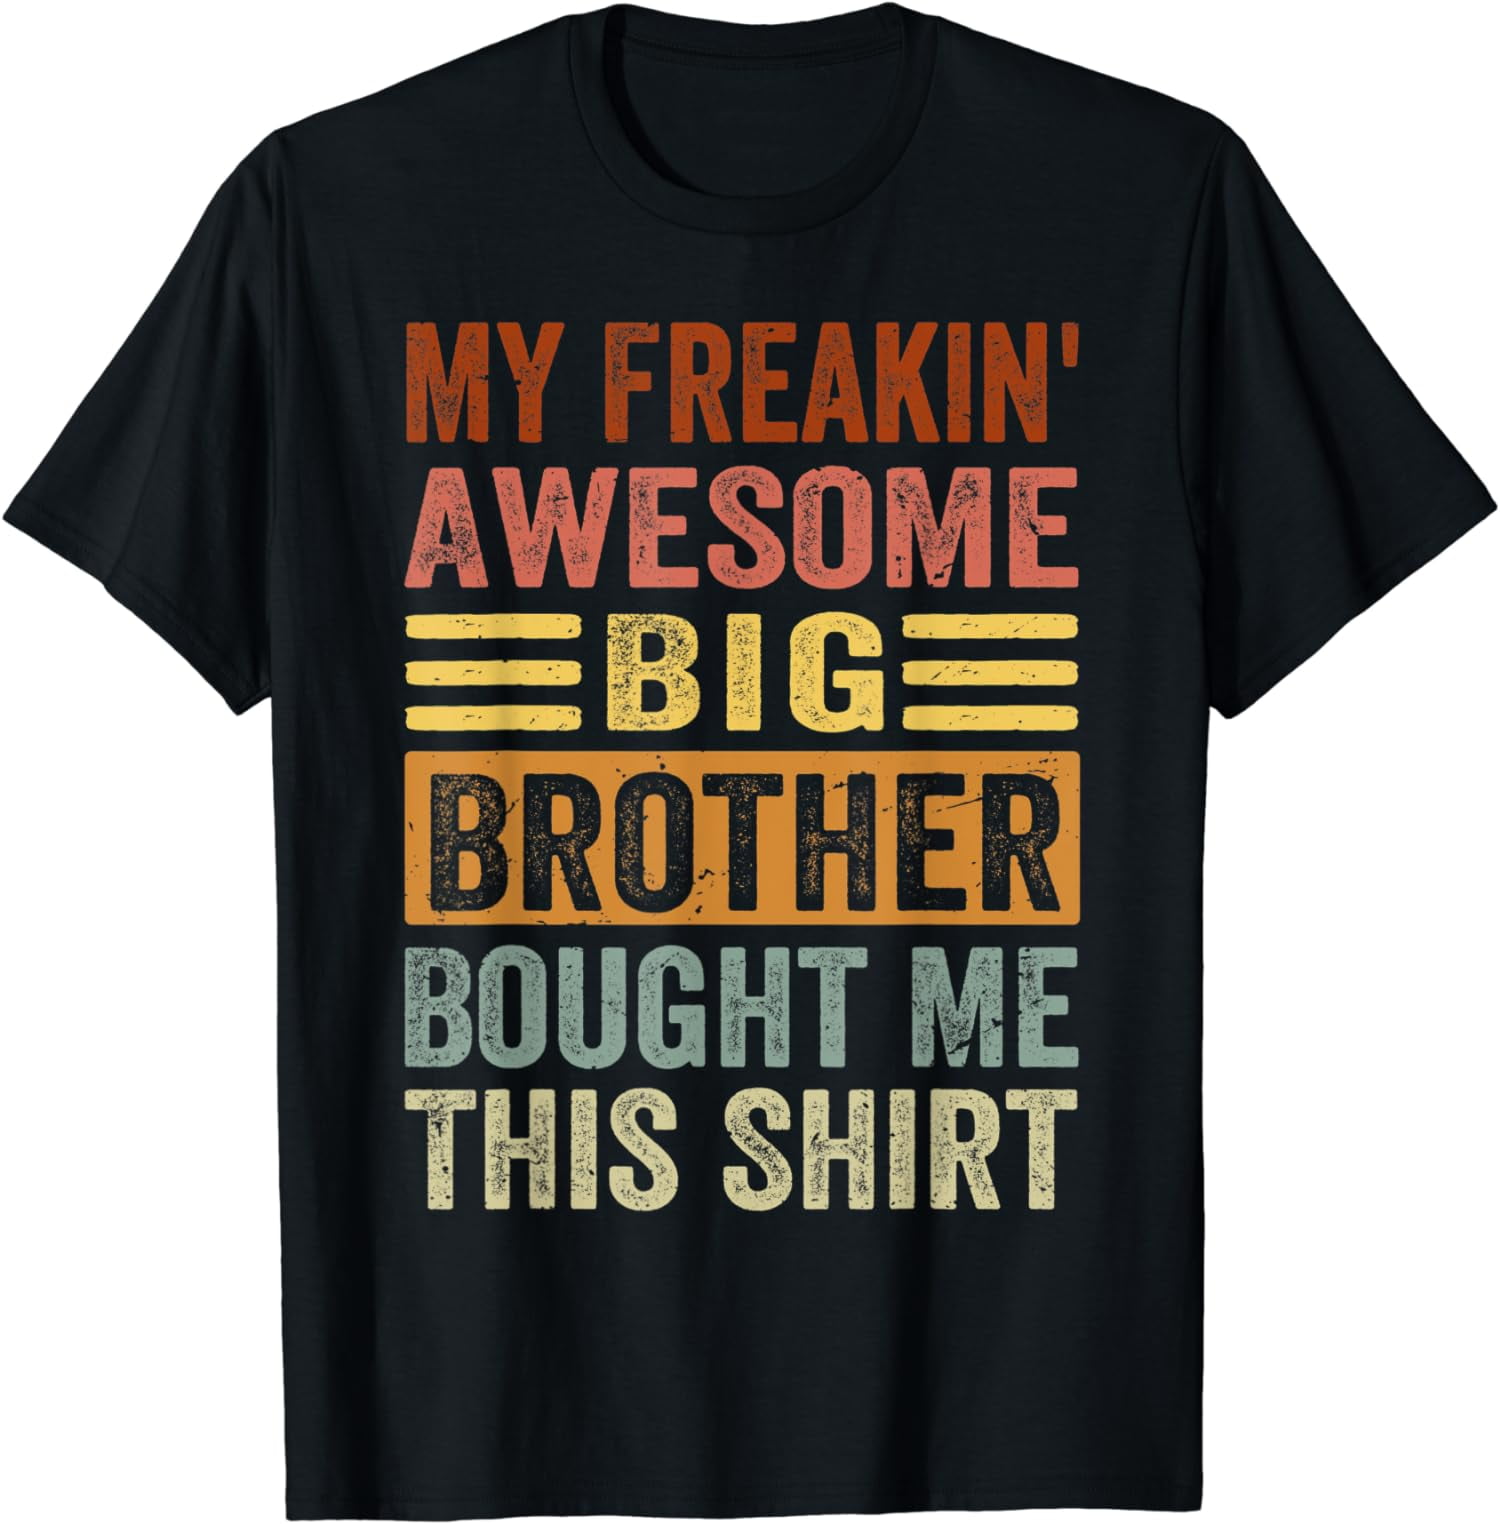 My Freakin' Awesome Big Brother Bought Me This Shirt T-Shirt - Walmart.com